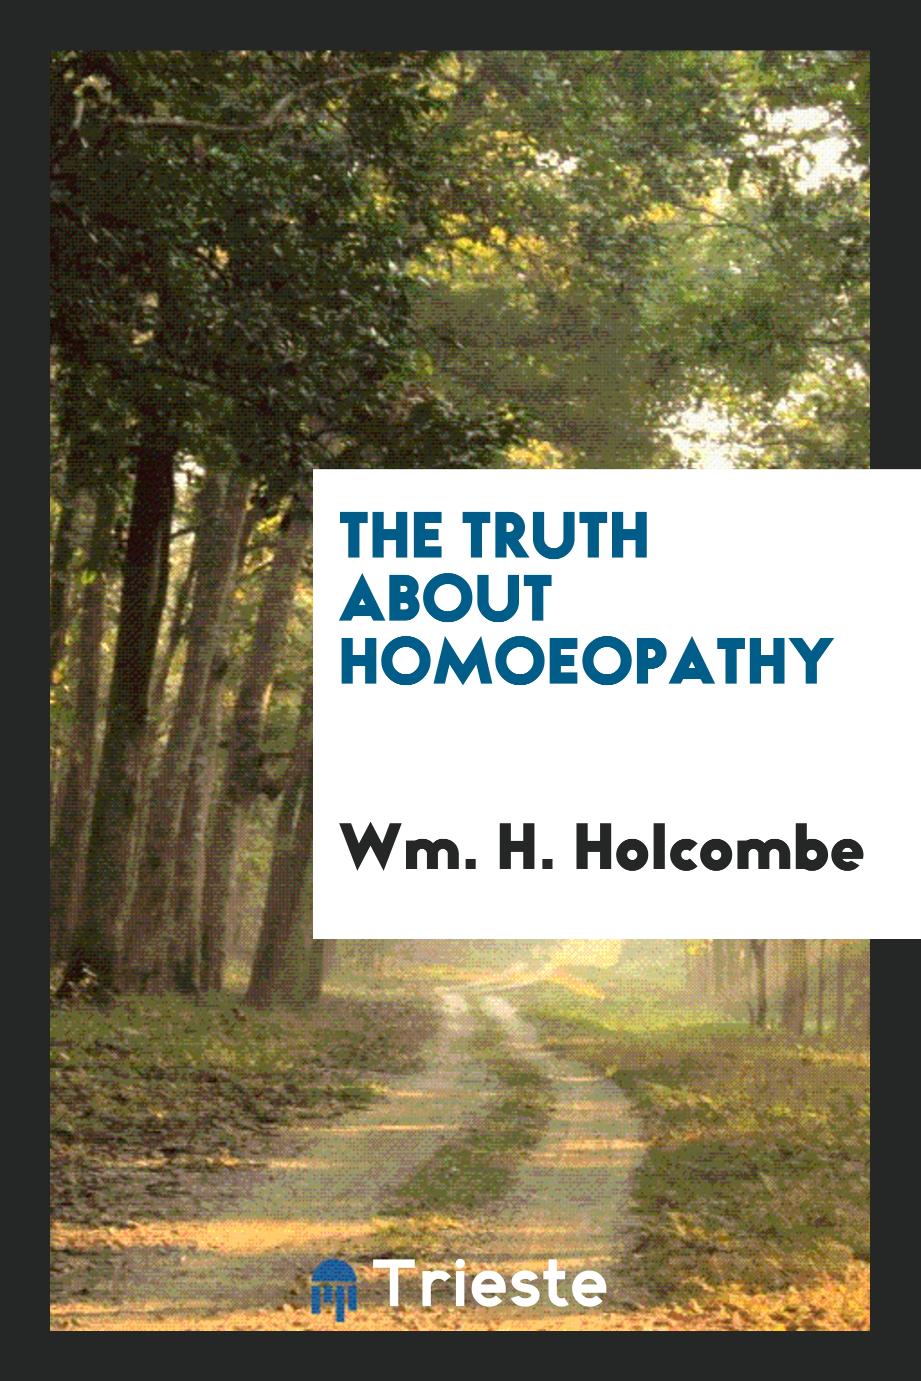 The truth about homoeopathy